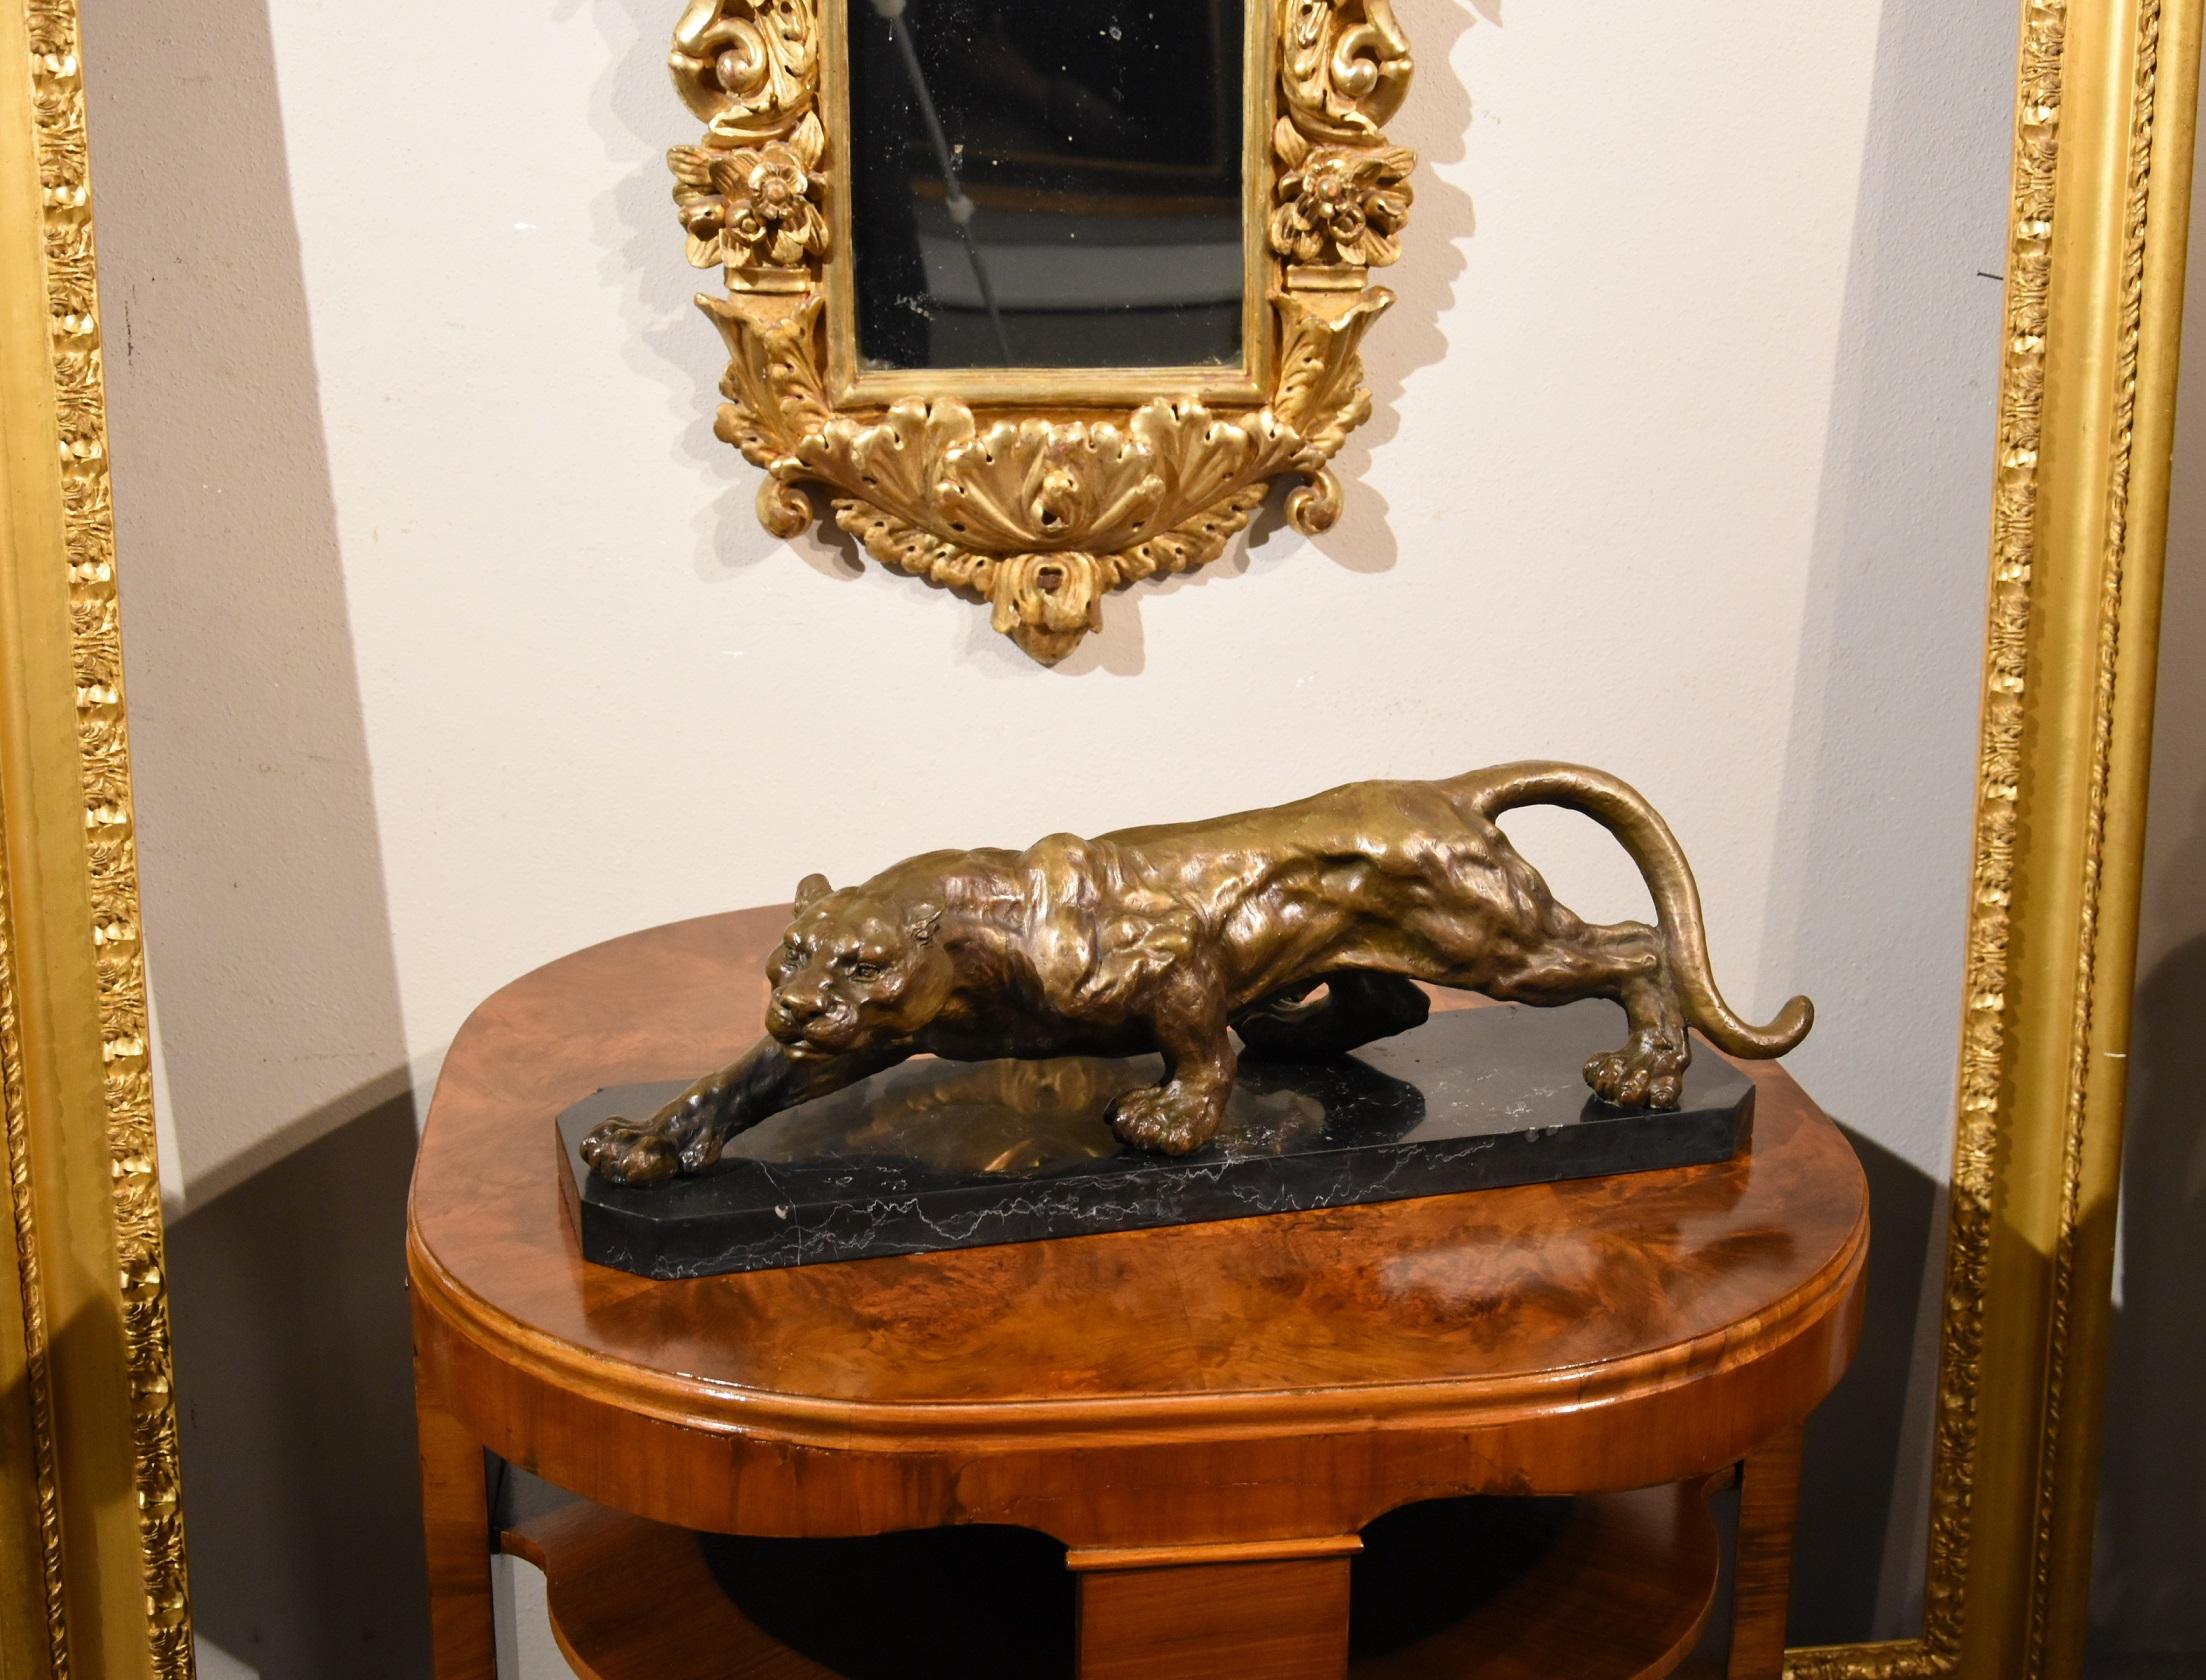 Sculpture of French manufacture from the Art Décò period
Panther in attacking pose

Lost wax bronze, supported by a marble base.
Dimensions (cm): 64 x 18 x h.22

Ancient sculpture representing a panther in the attack pose, a snapshot of the fleeting